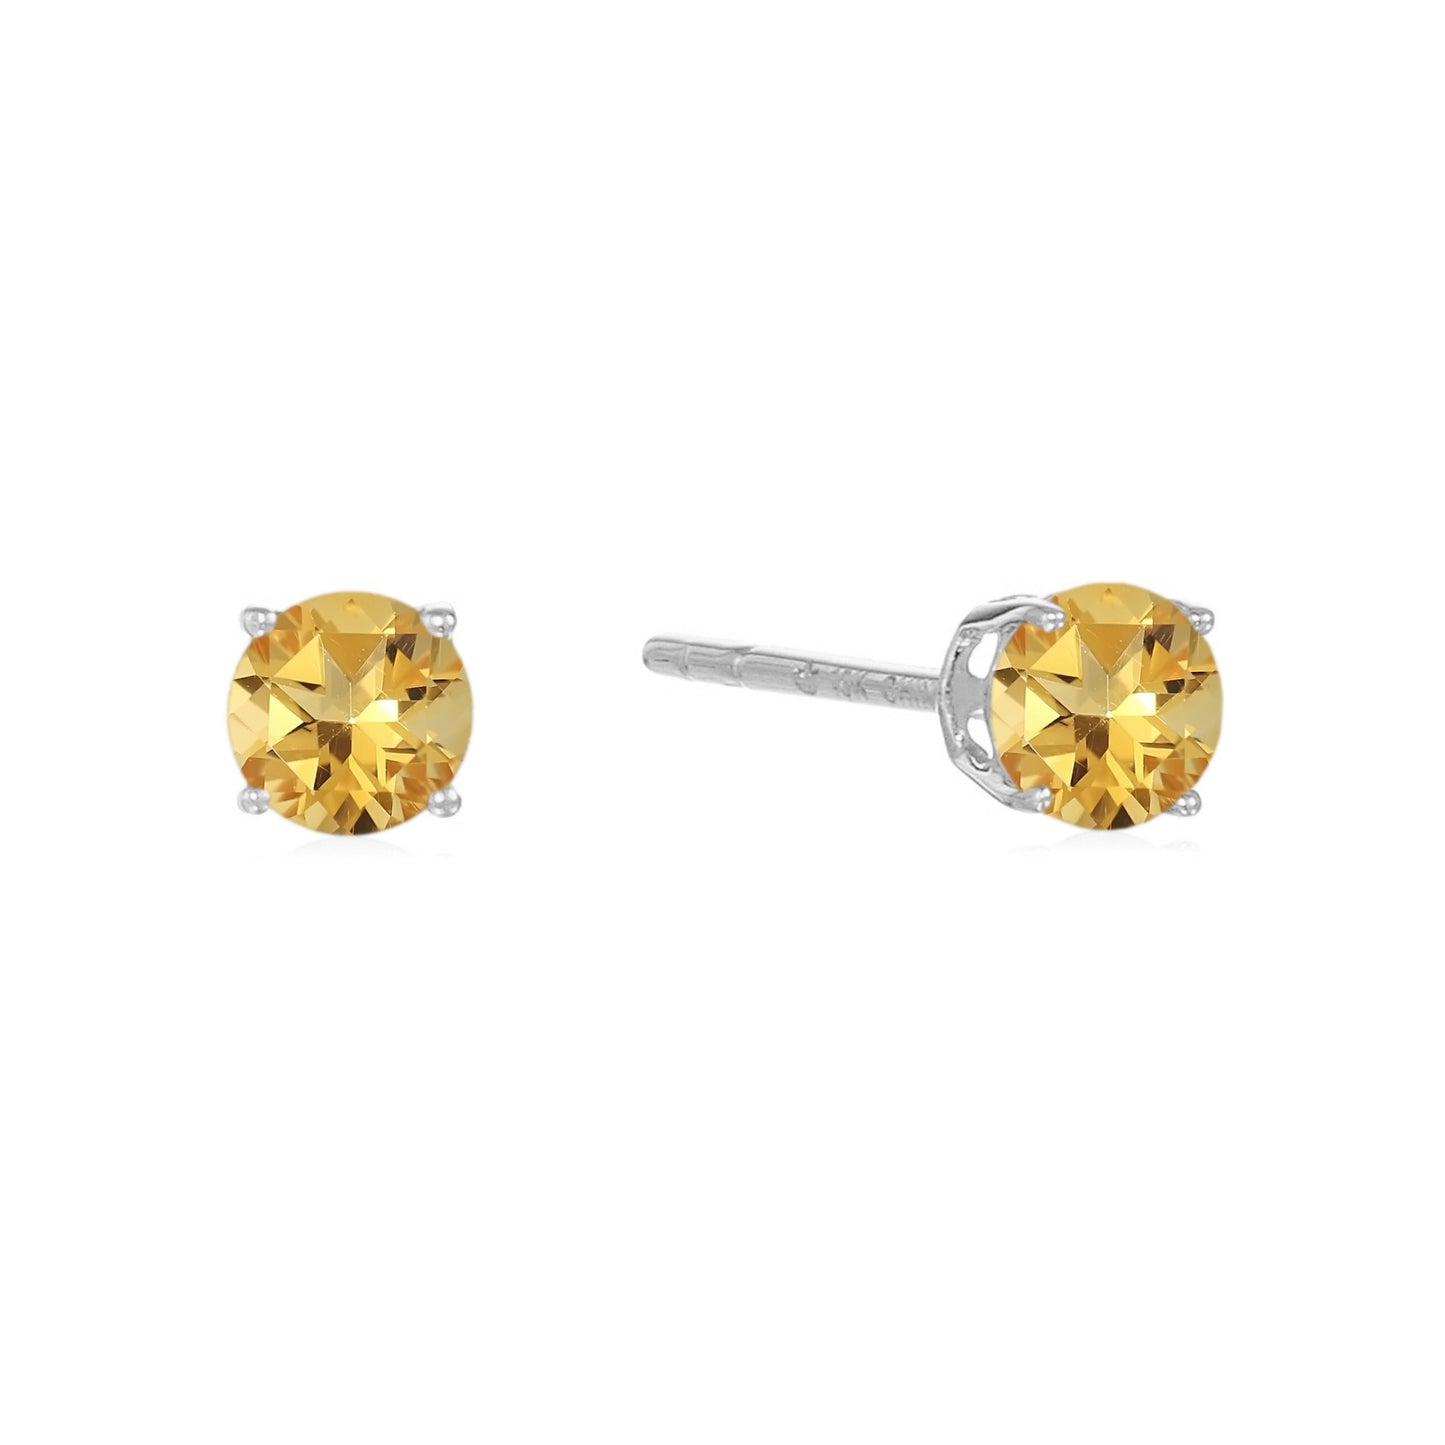 Solid 10K Yellow, White or Rose Gold 4mm Round Genuine Gemstone Birthstone Prong Set Stud Earrings For Women and Girls